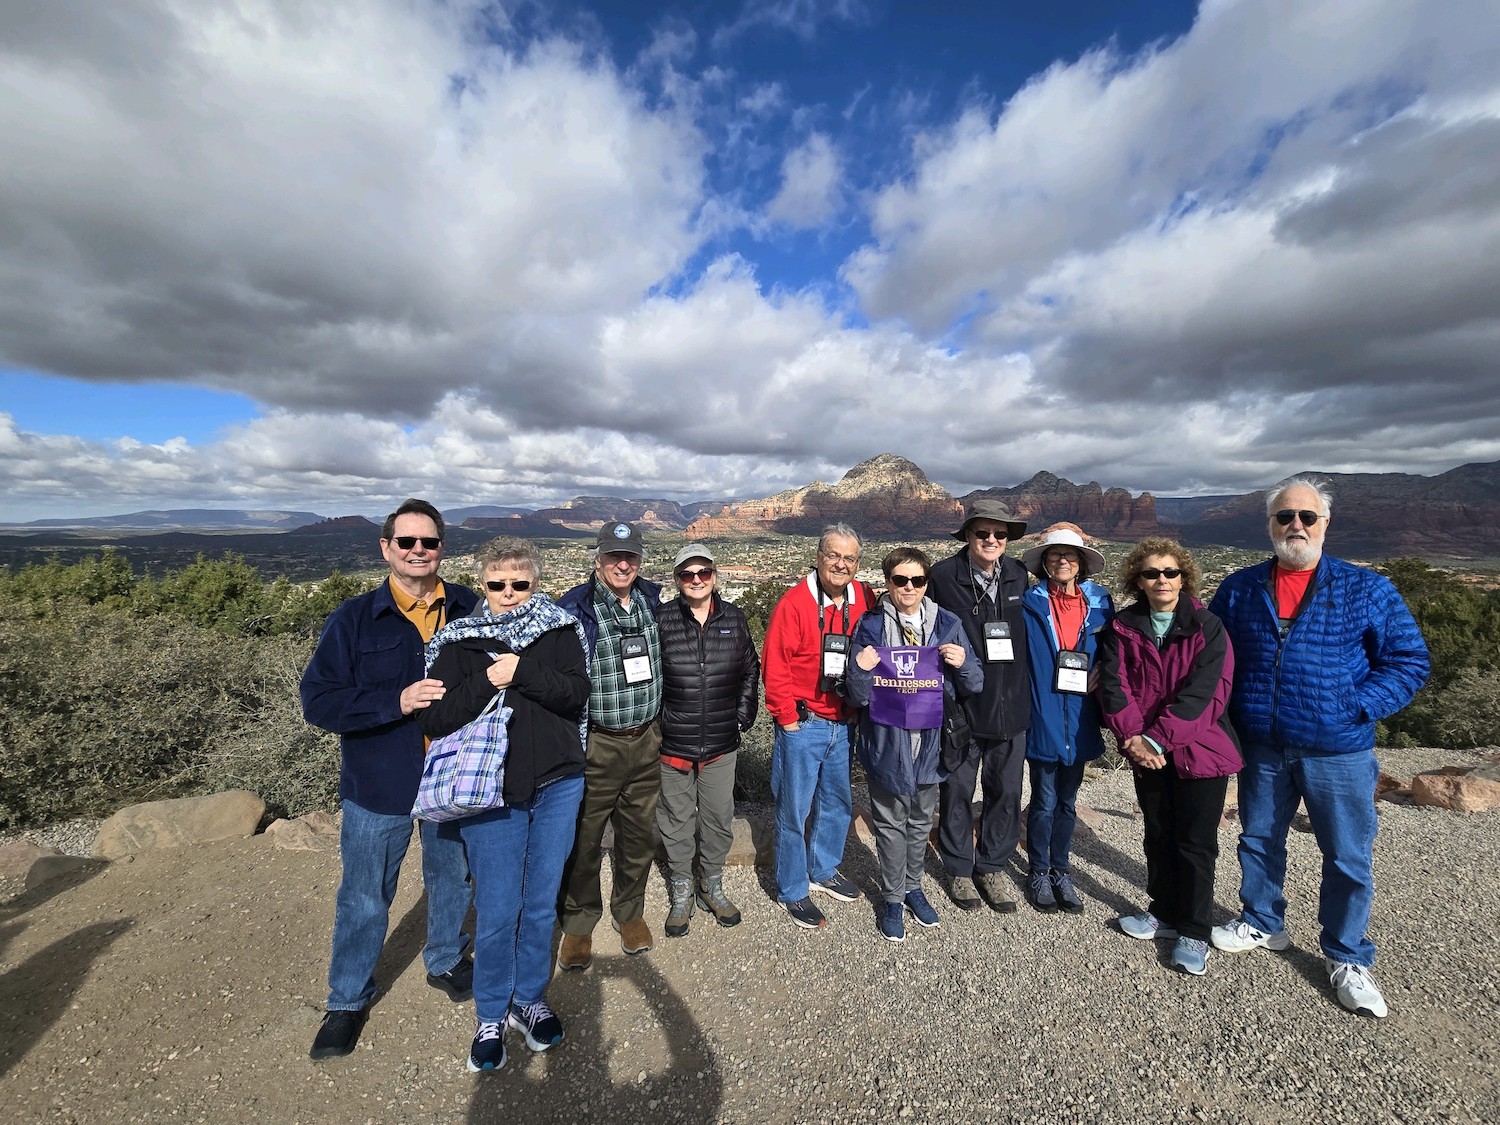 Travelers to the Grand Canyon in front of a vista of red rock